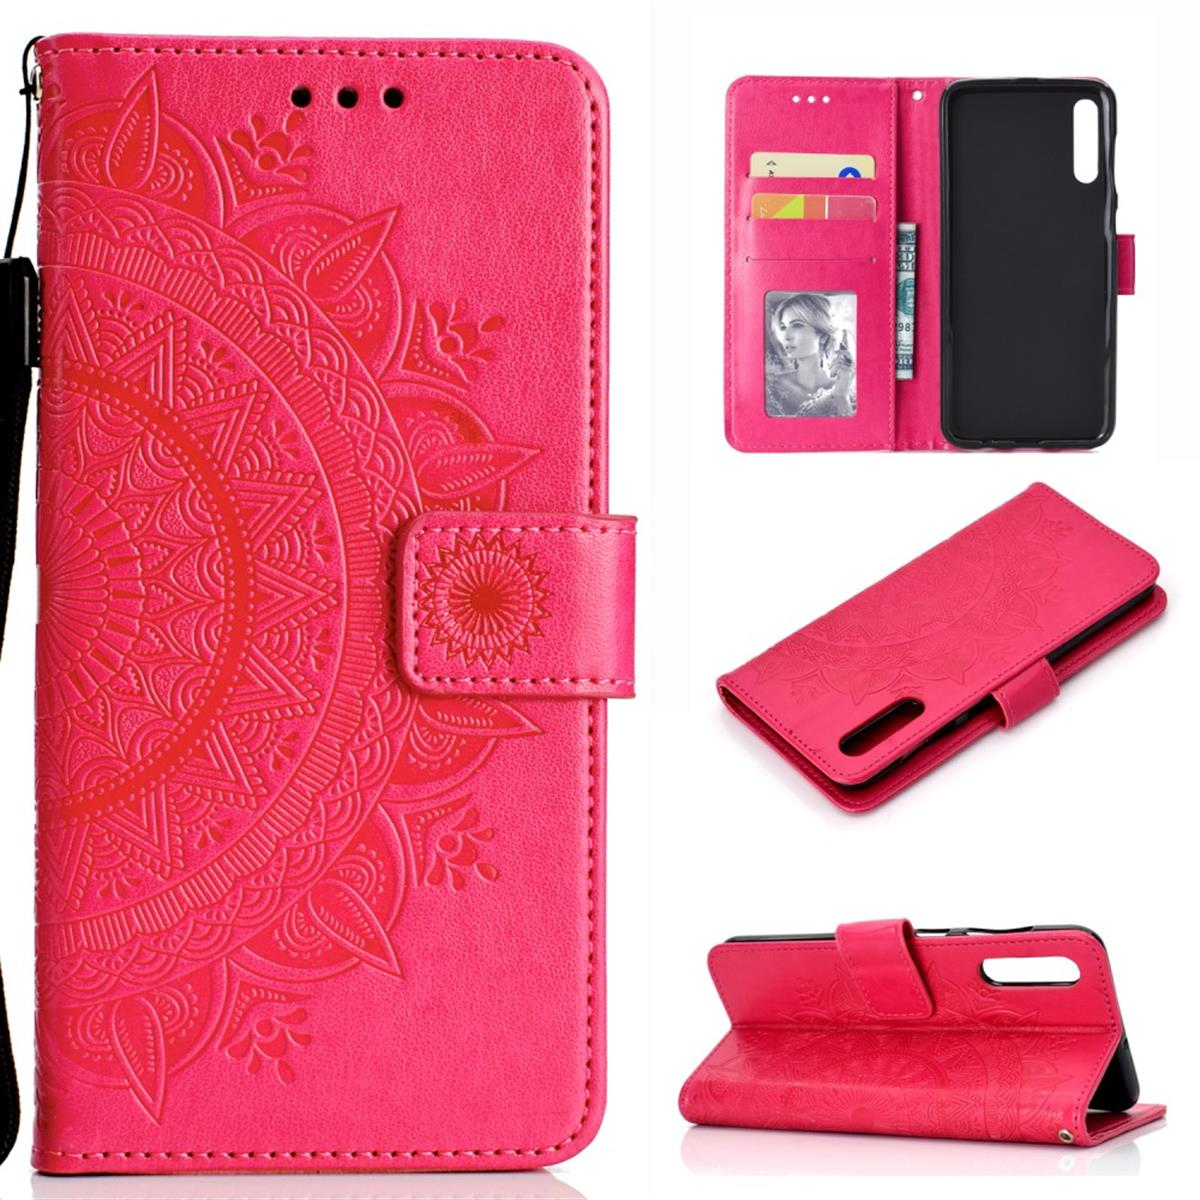 COVERKINGZ Klapphülle mit Samsung, Bookcover, Muster, A50/A30s, Mandala Galaxy Pink